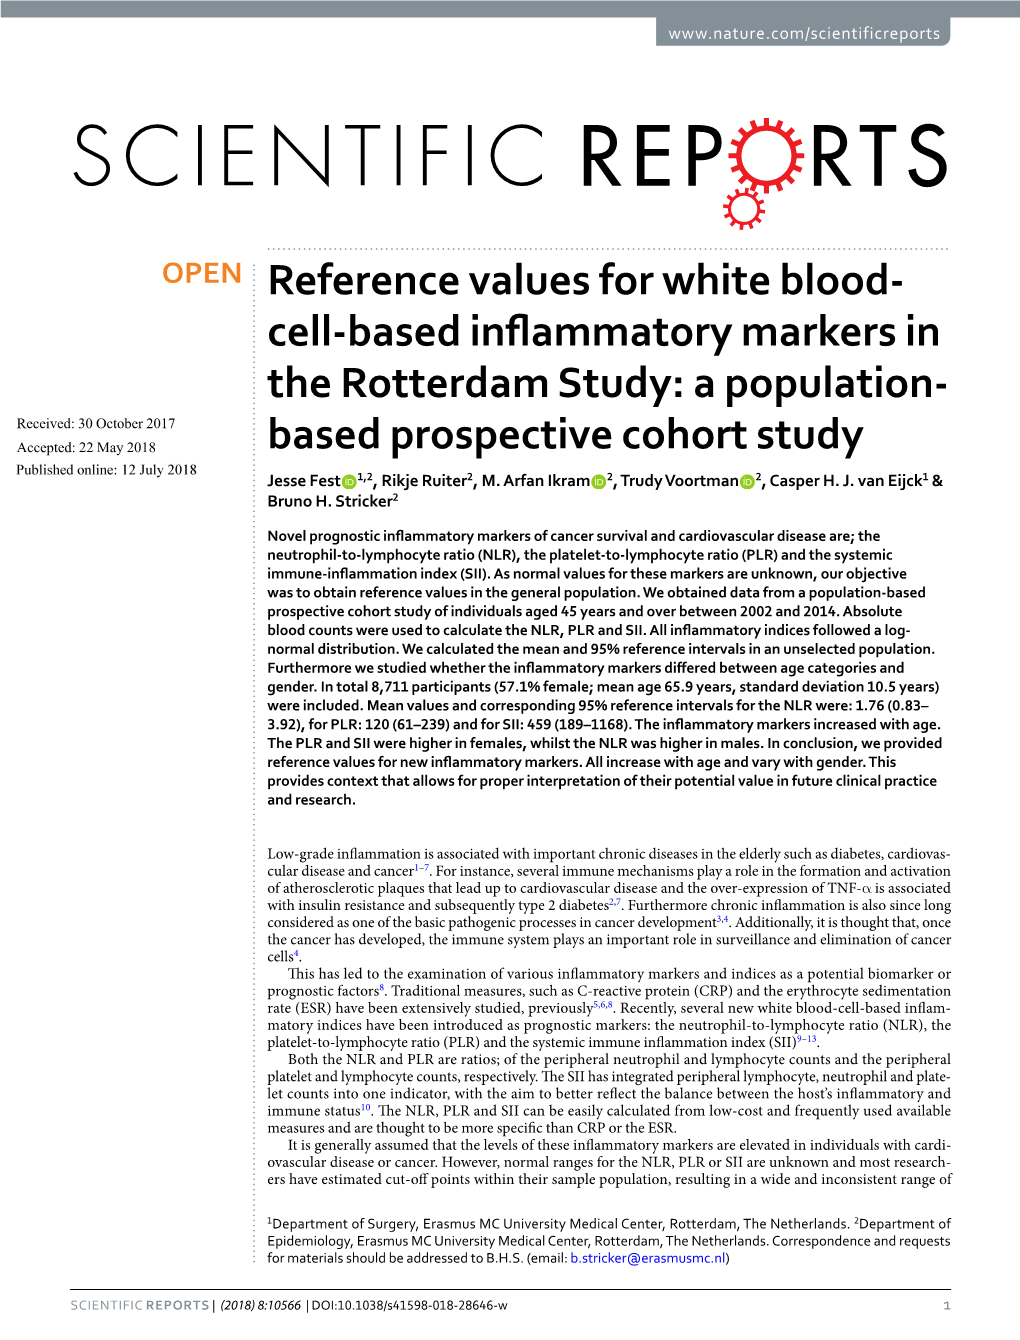 Cell-Based Inflammatory Markers in the Rotterdam Study: a Population